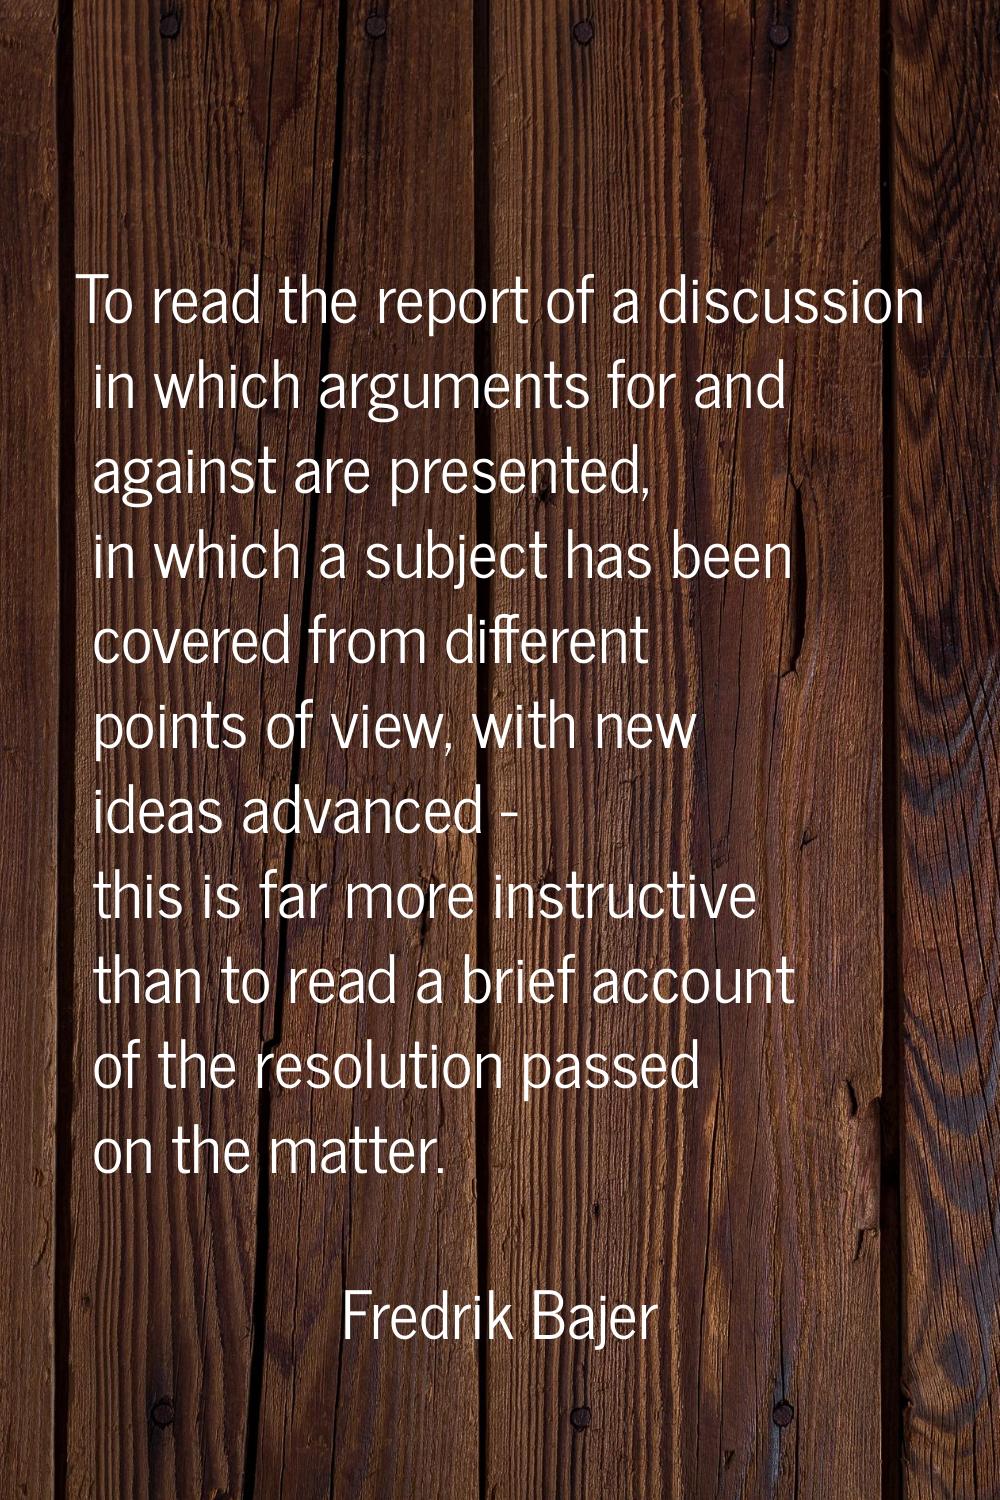 To read the report of a discussion in which arguments for and against are presented, in which a sub